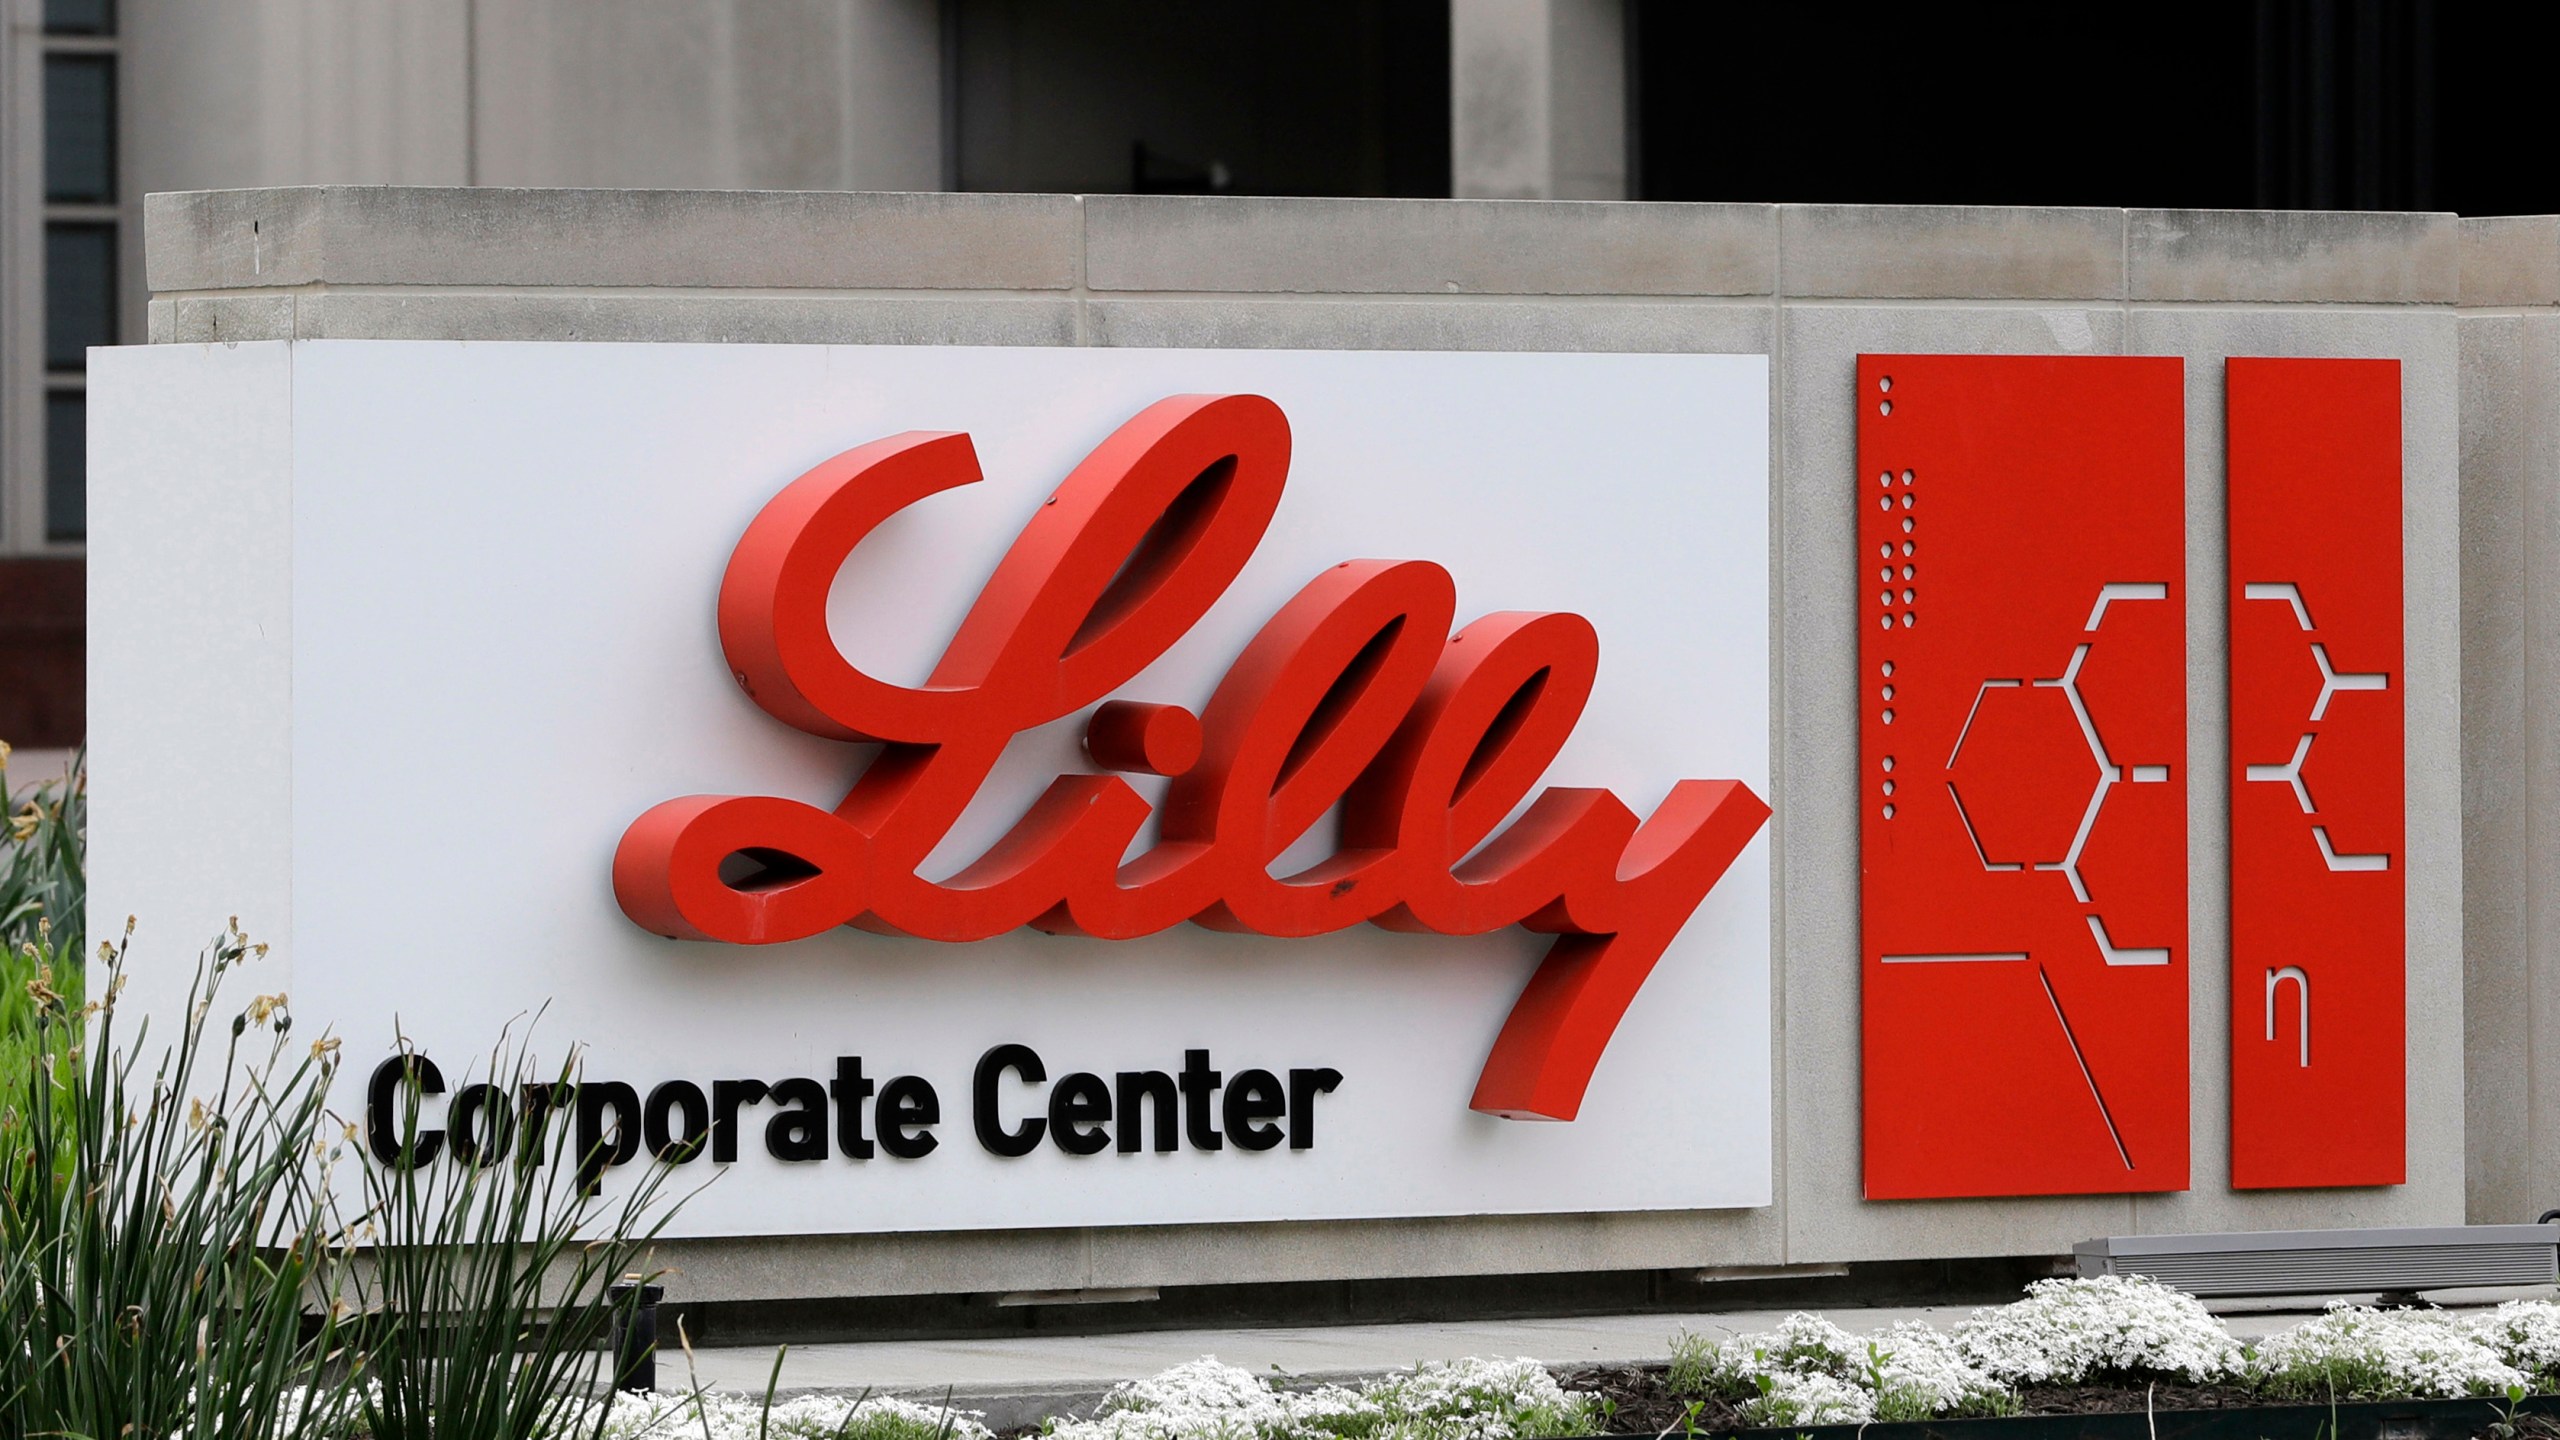 FILE - A sign for Eli Lilly & Co. sits outside their corporate headquarters in Indianapolis on April 26, 2017. Federal regulators are putting off a decision on Eli Lilly’s potential Alzheimer’s treatment with an unusual request to have an advisory committee examine the drug. Lilly expected a decision on donanemab in this year’s first quarter, which ends this month. But the drugmaker said Friday, March 8, 2024, that the Food and Drug Administration wants more information about donanemab’s safety and effectiveness. (AP Photo/Darron Cummings, File)